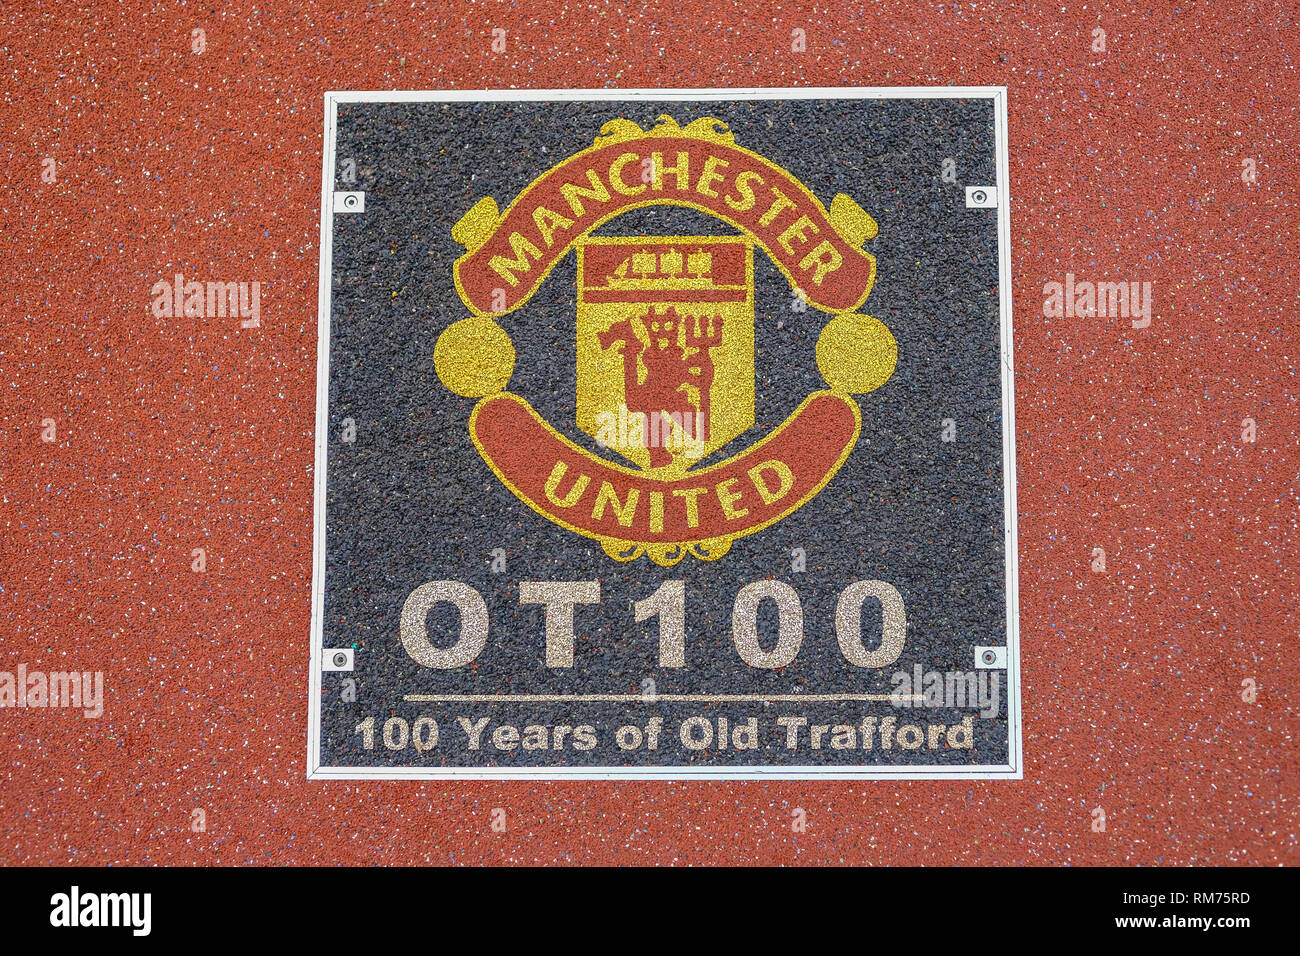 Old Trafford, Manchester, England, UK - January 20, 2019: floor signage at the Manchester United football club to mark the occassion of 100 Years at O Stock Photo